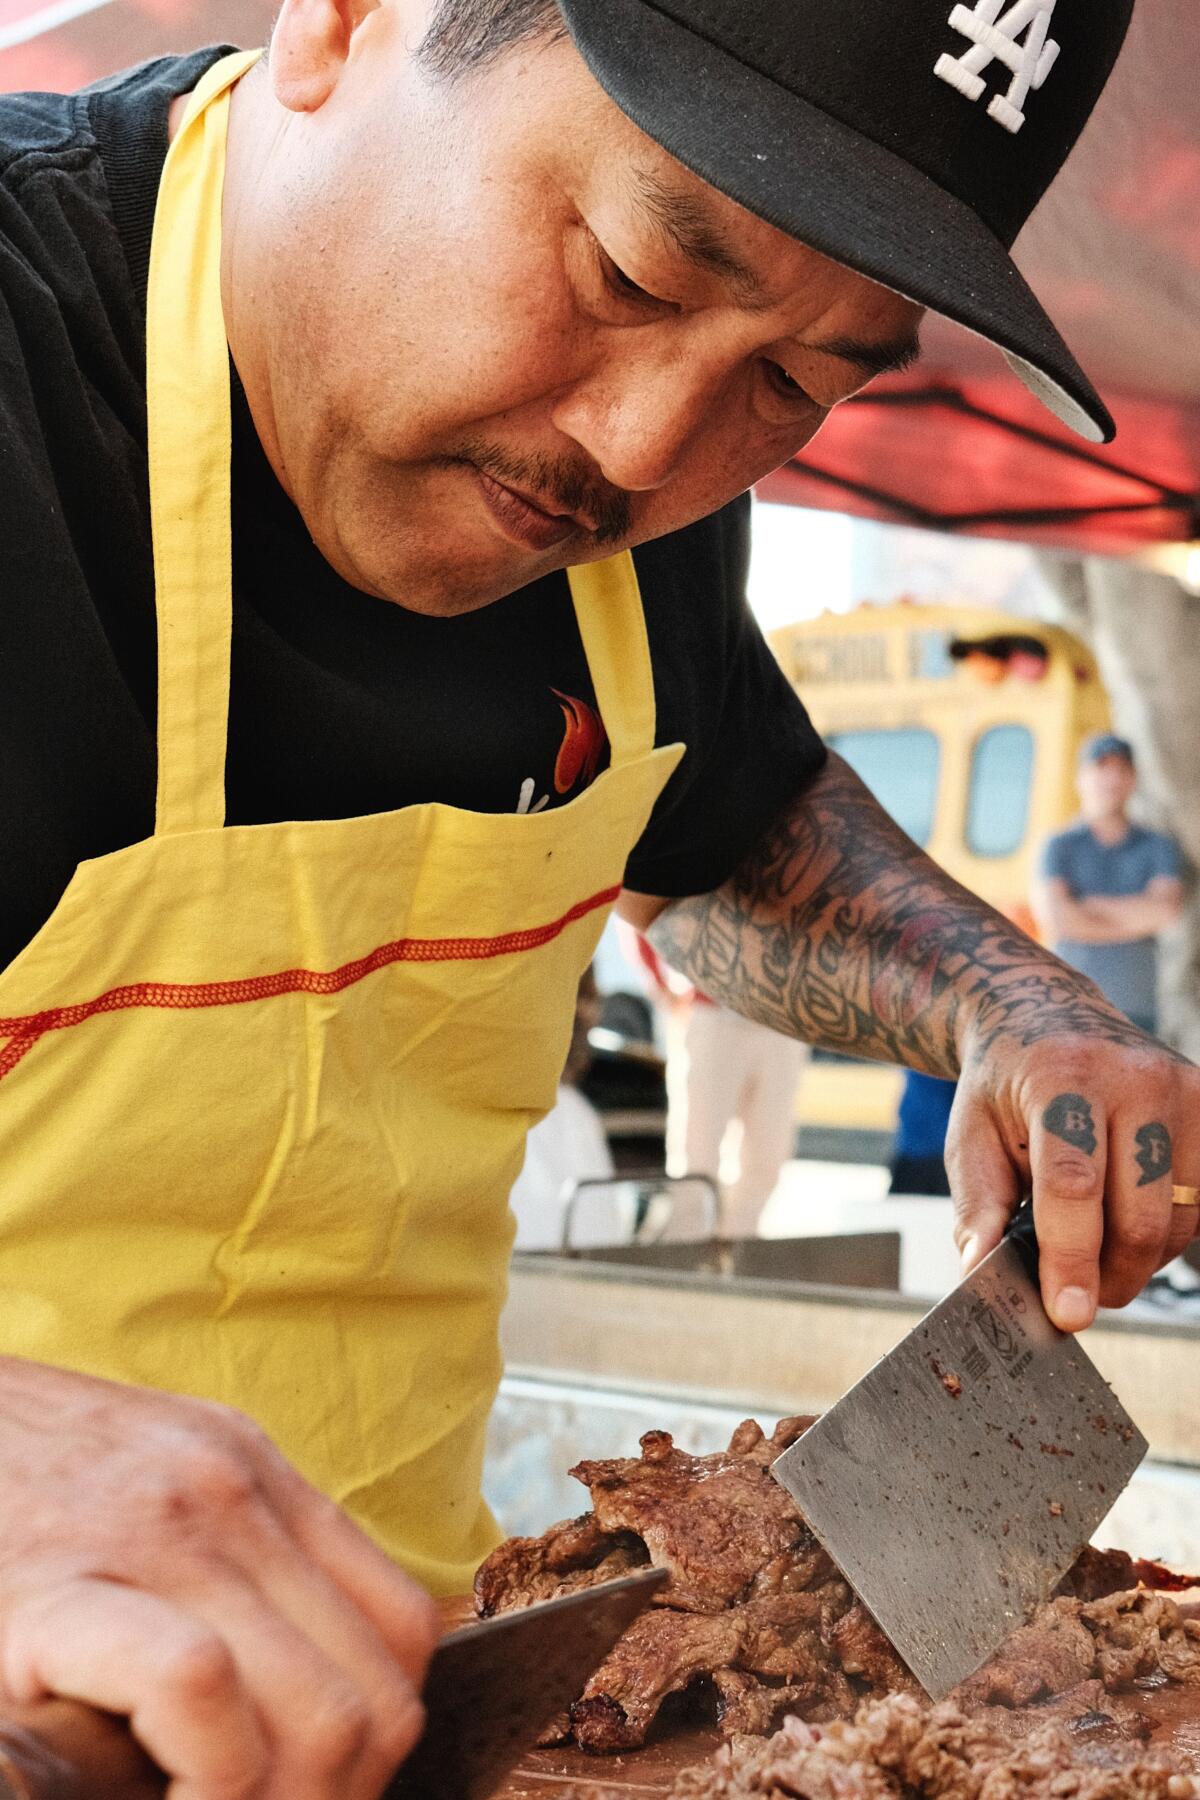 Kogi founder Roy Choi, in a yellow apron and L.A. baseball hat, prepares al pastor